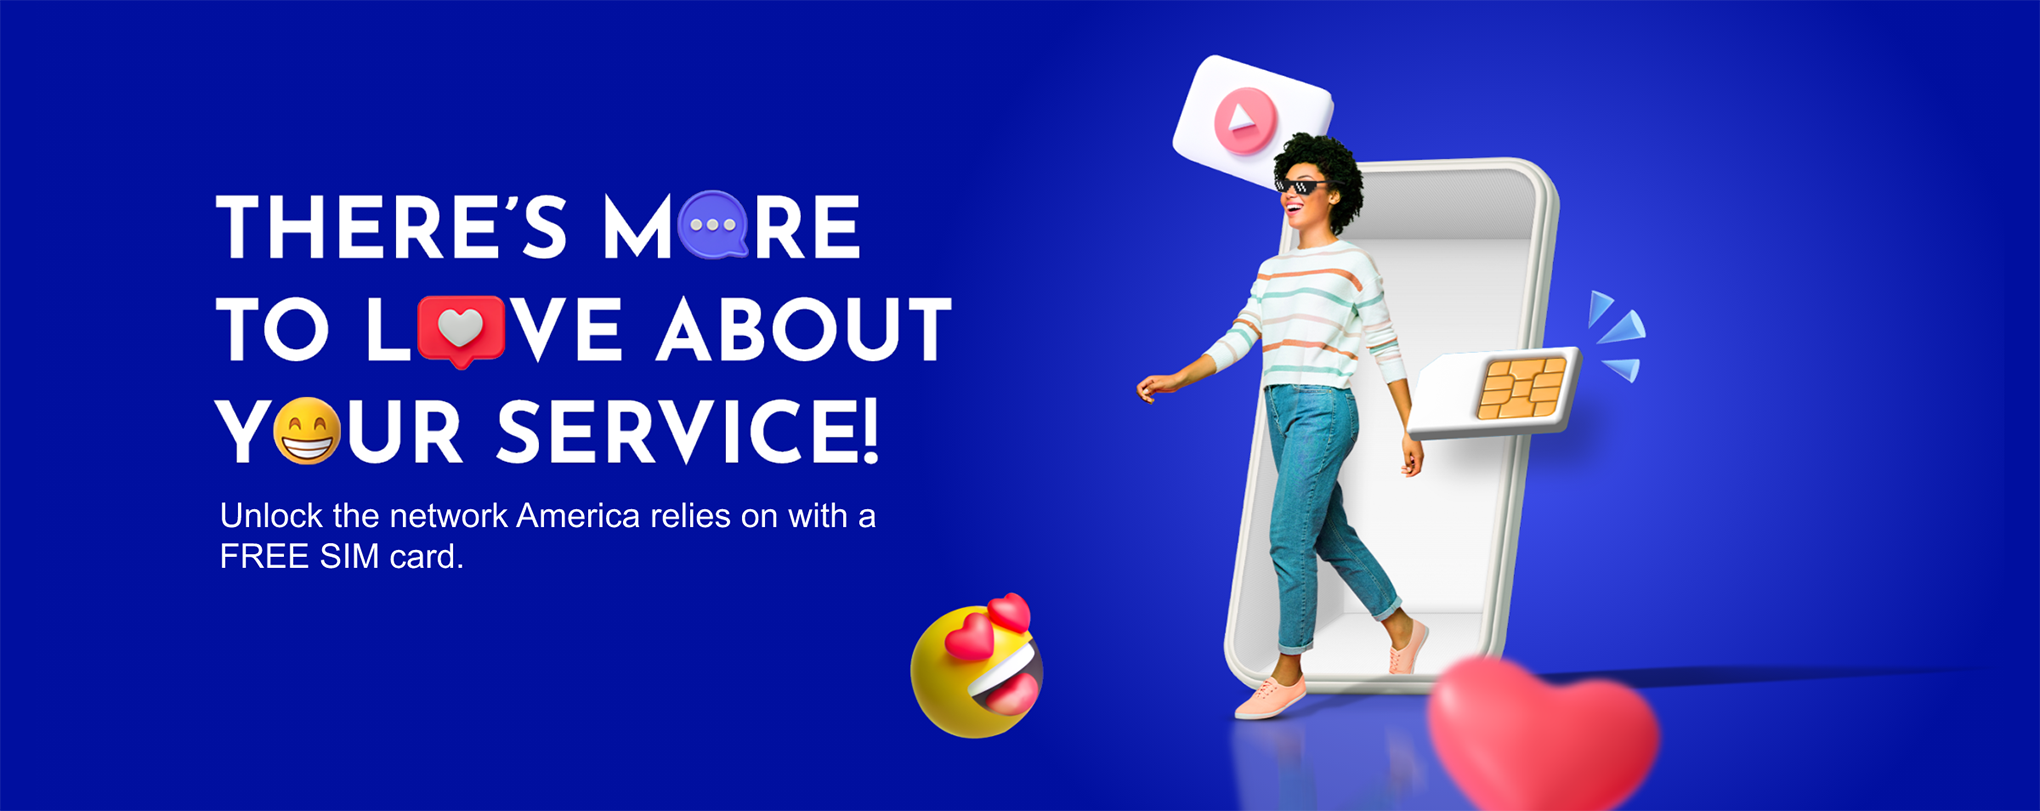 There's more to love about your service!